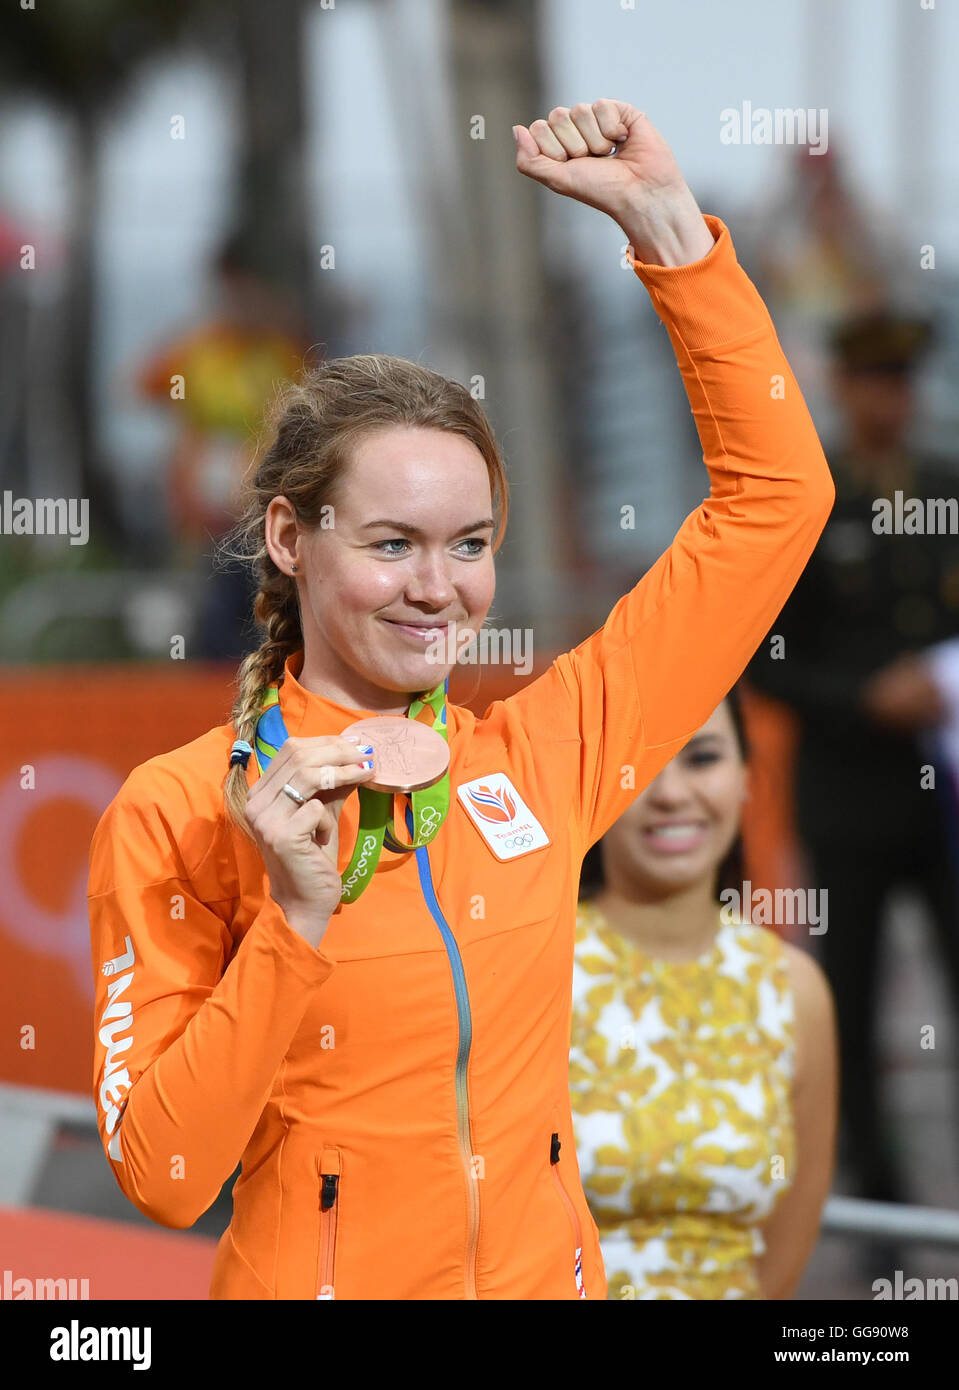 Rio de Janeiro, Brazil. 10th Aug, 2016. Third placed Anna van der Breggen of the Netherlands celebrates on the podium after the women's Individual Time Trial of the Rio 2016 Olympic Games Road Cycling events at Pontal in Rio de Janeiro, Brazil, 10 August 2016. Photo: Soeren Stache/dpa/Alamy Live News Stock Photo